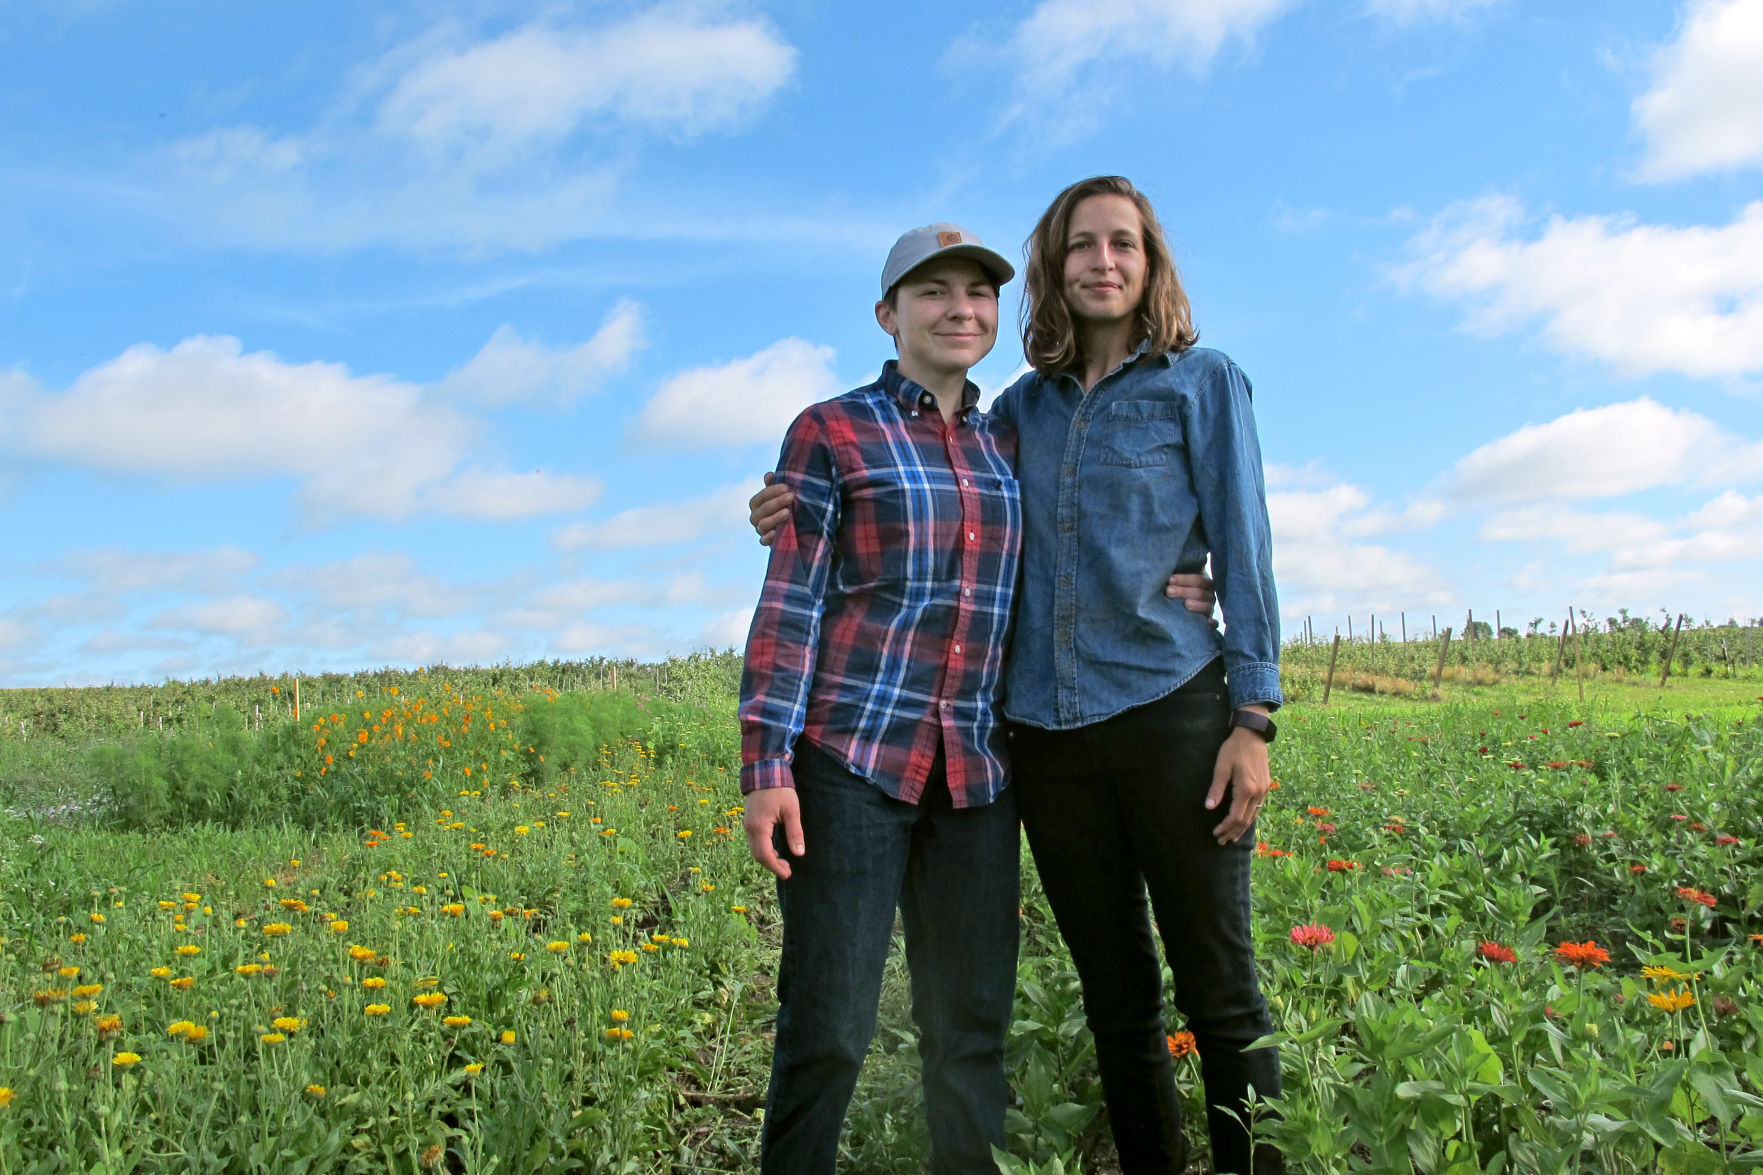 Shae Pesek (left) and Anna Hankins operate Over the Moon Farm & Flowers in Ryan, Iowa. PHOTO CREDIT: Contributed